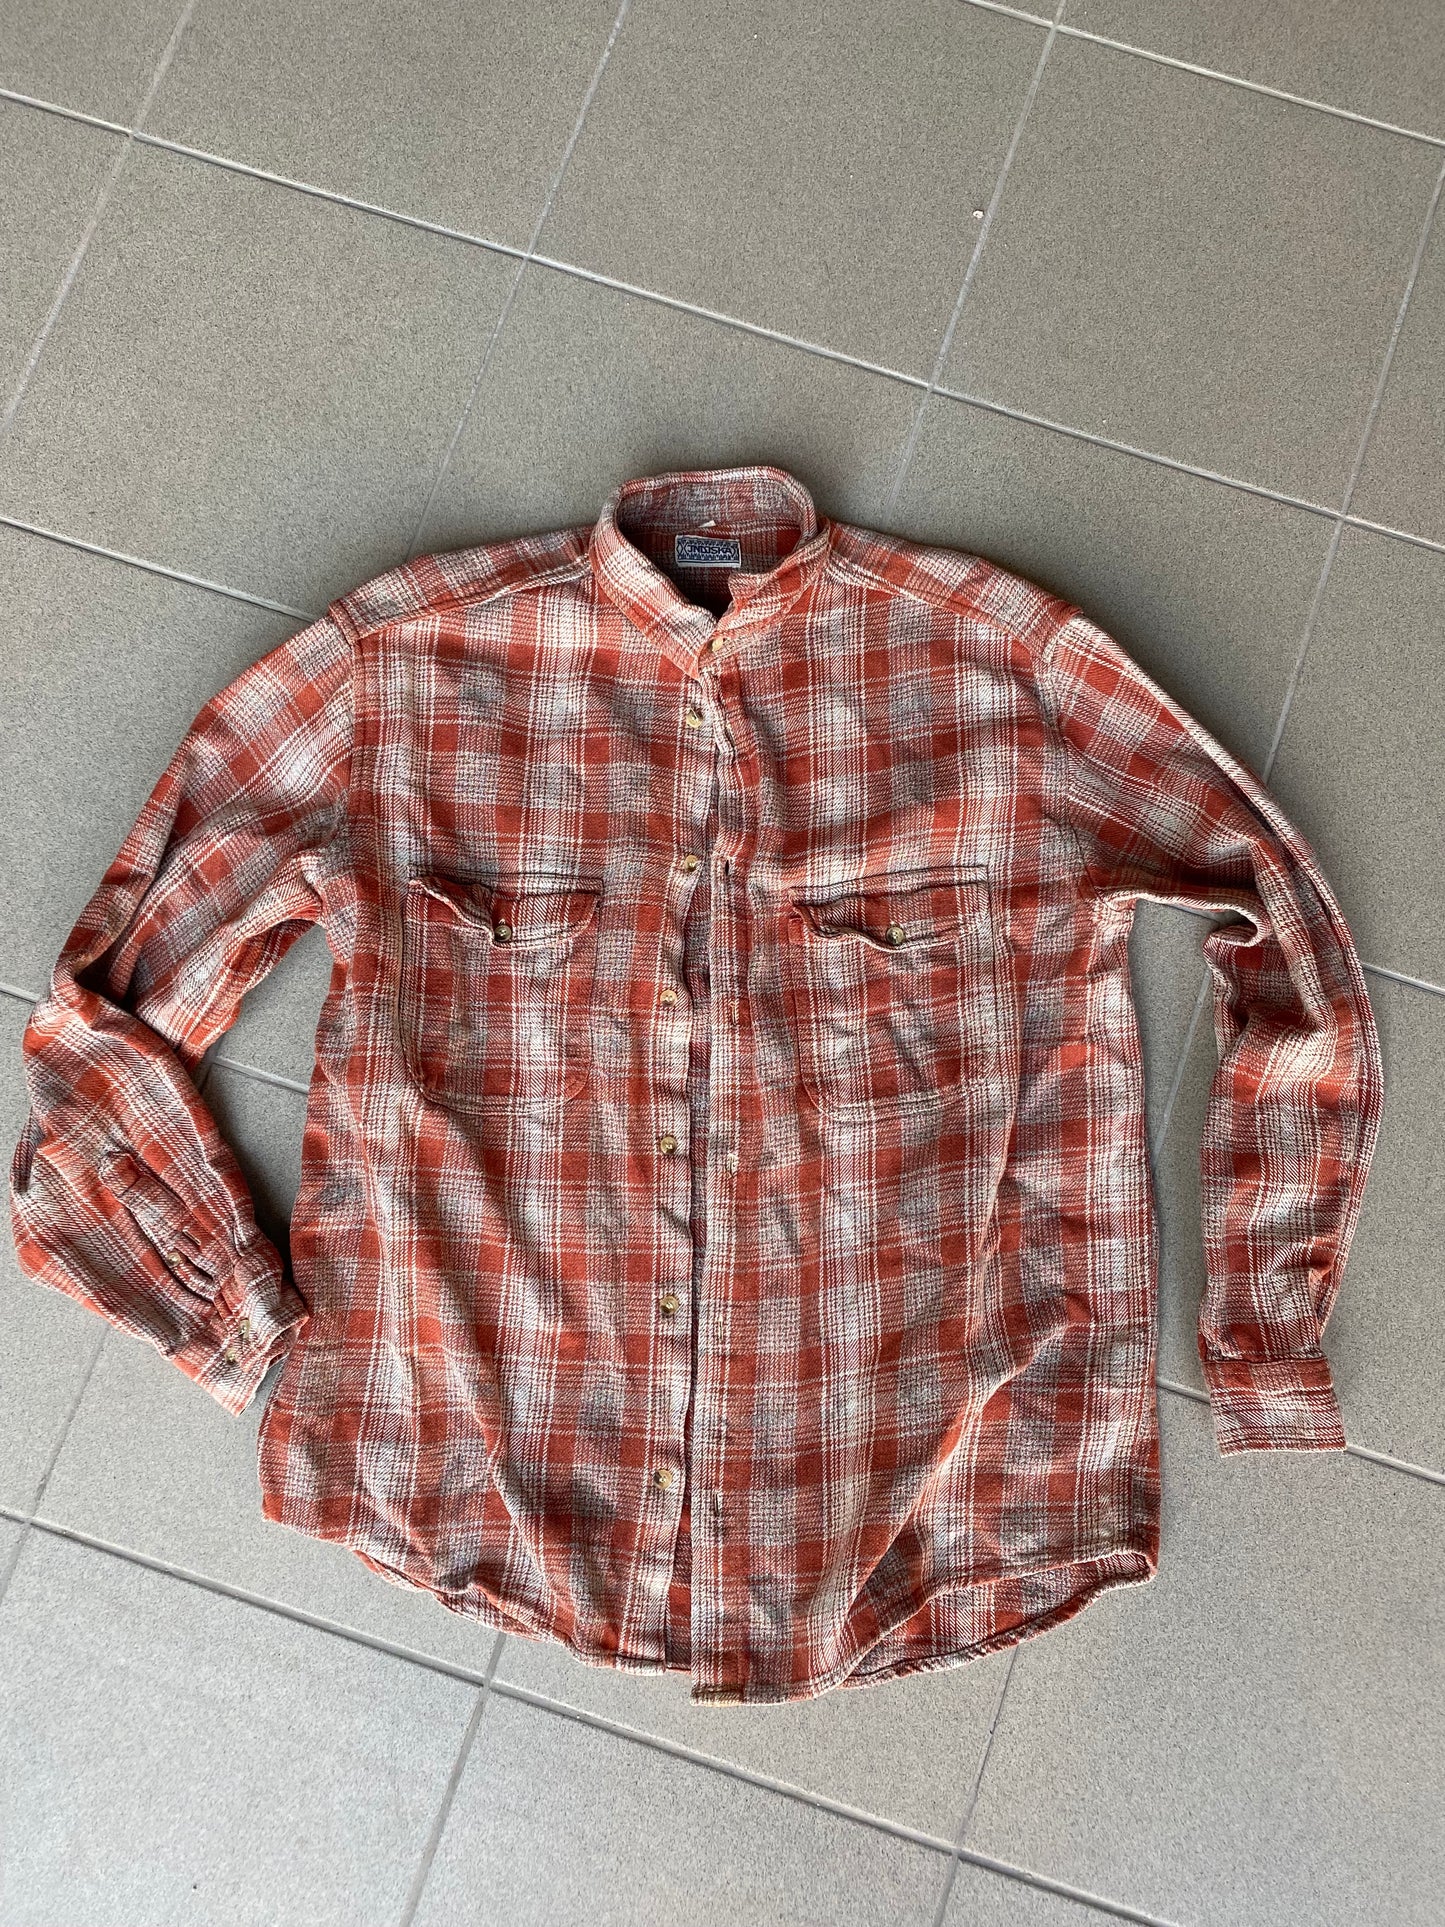 Vintage 90s Flanell Shirt - size M